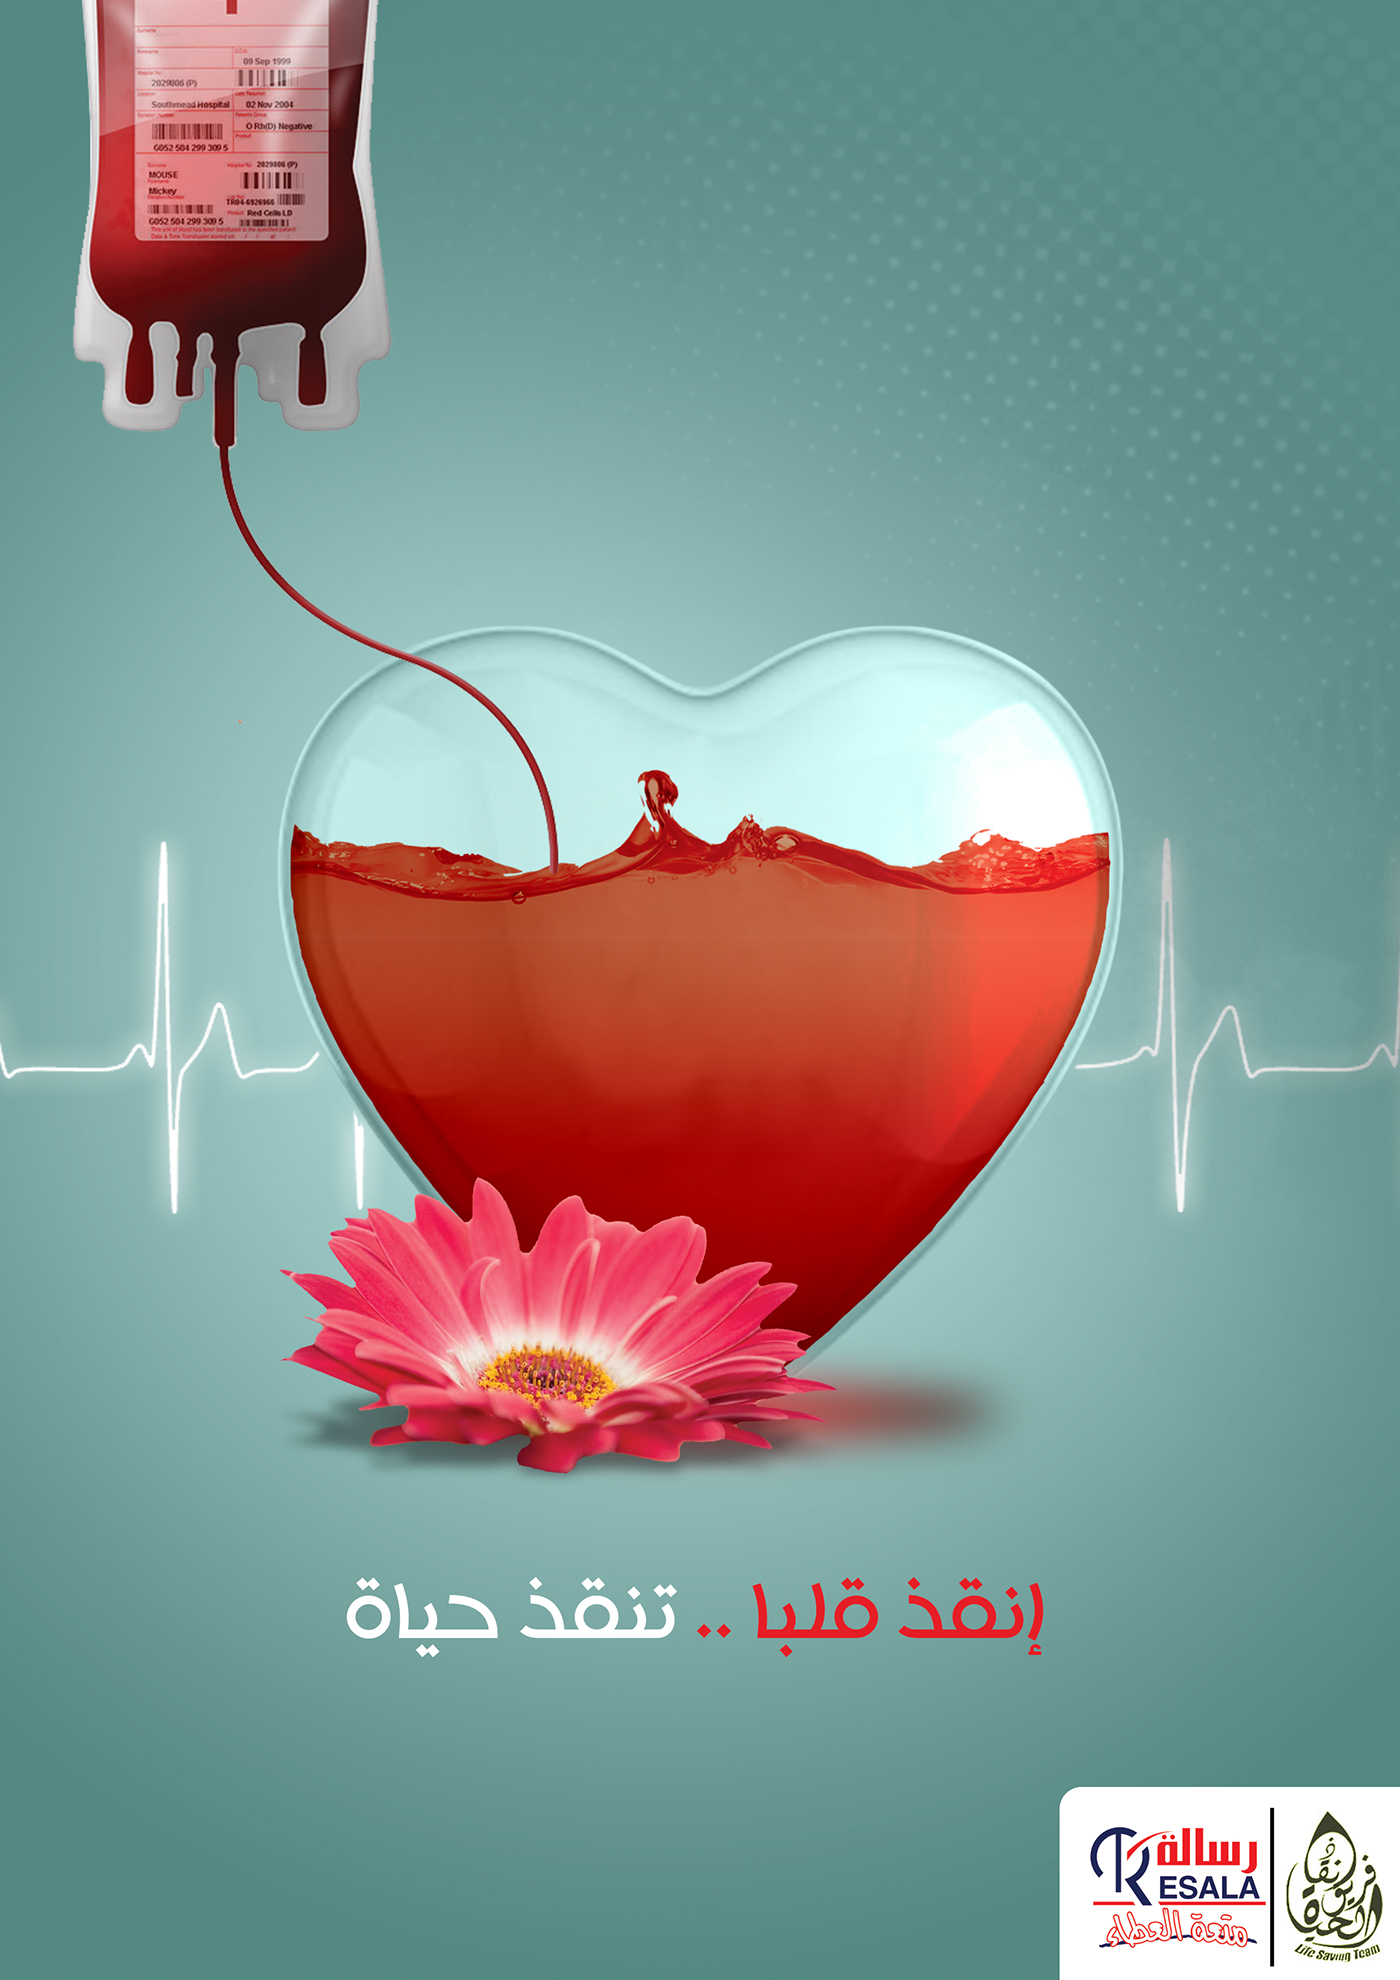 blood donation campaign on Behance